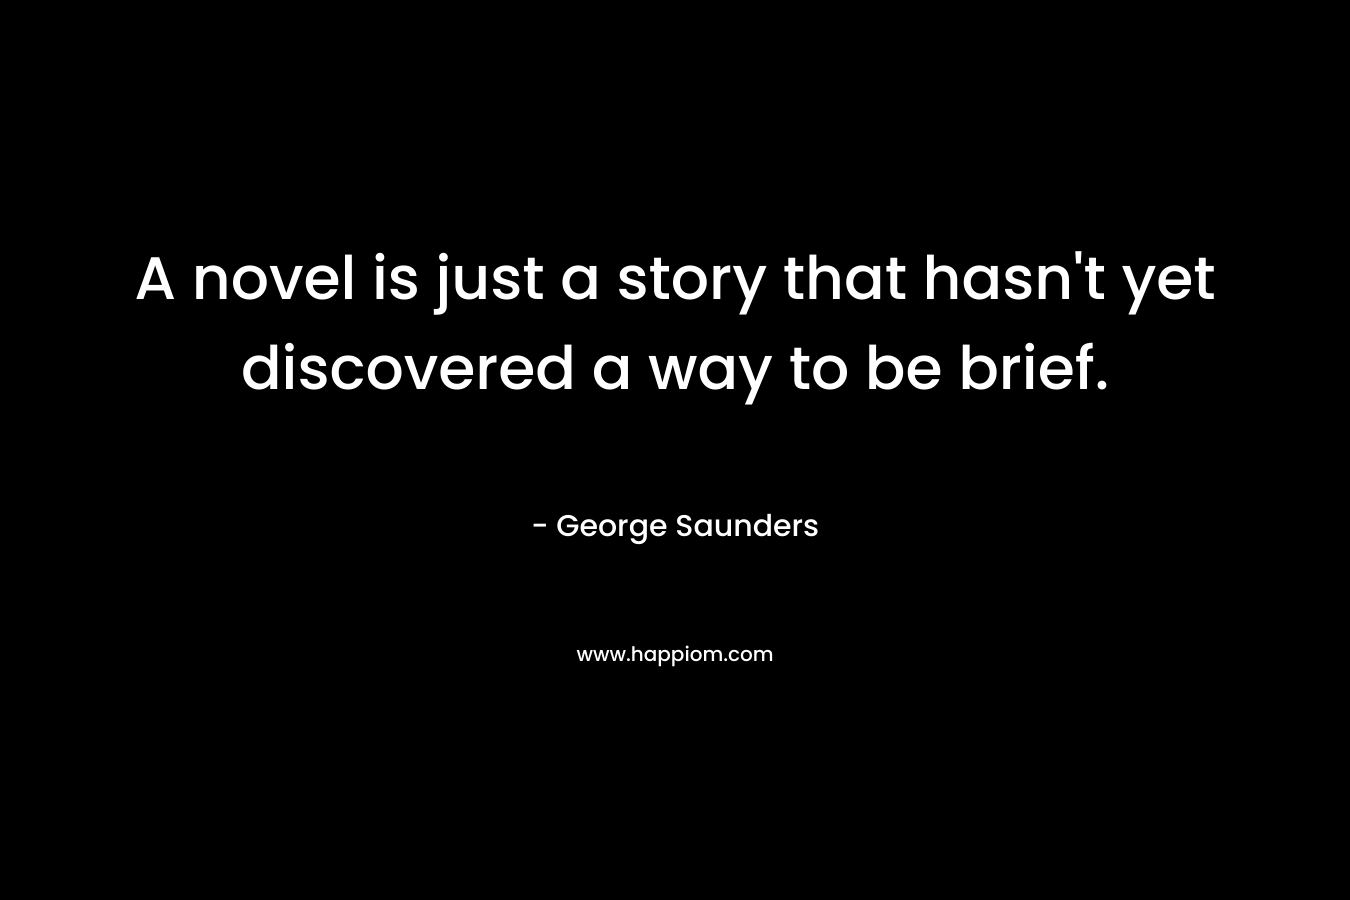 A novel is just a story that hasn’t yet discovered a way to be brief. – George Saunders